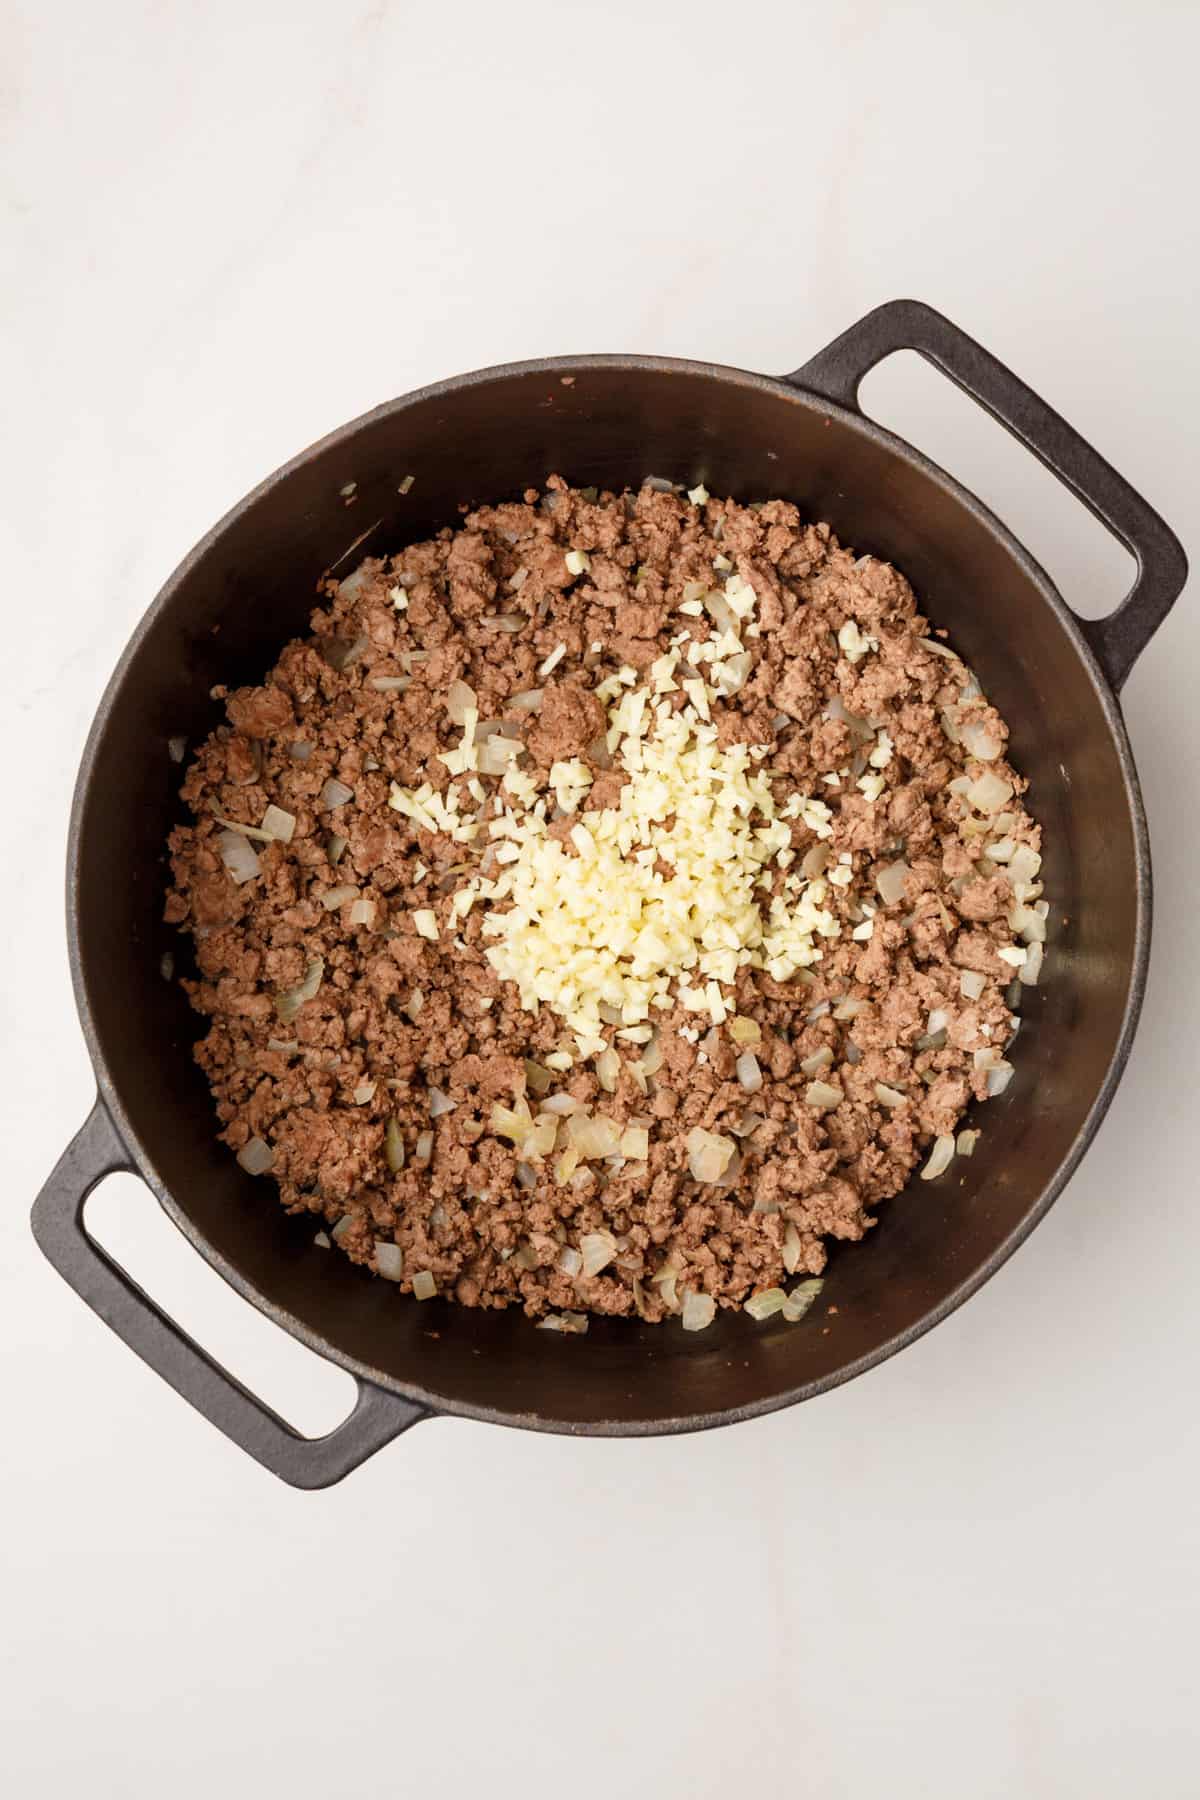 cooked ground beef, onion and garlic, in a large cast iron dutch oven